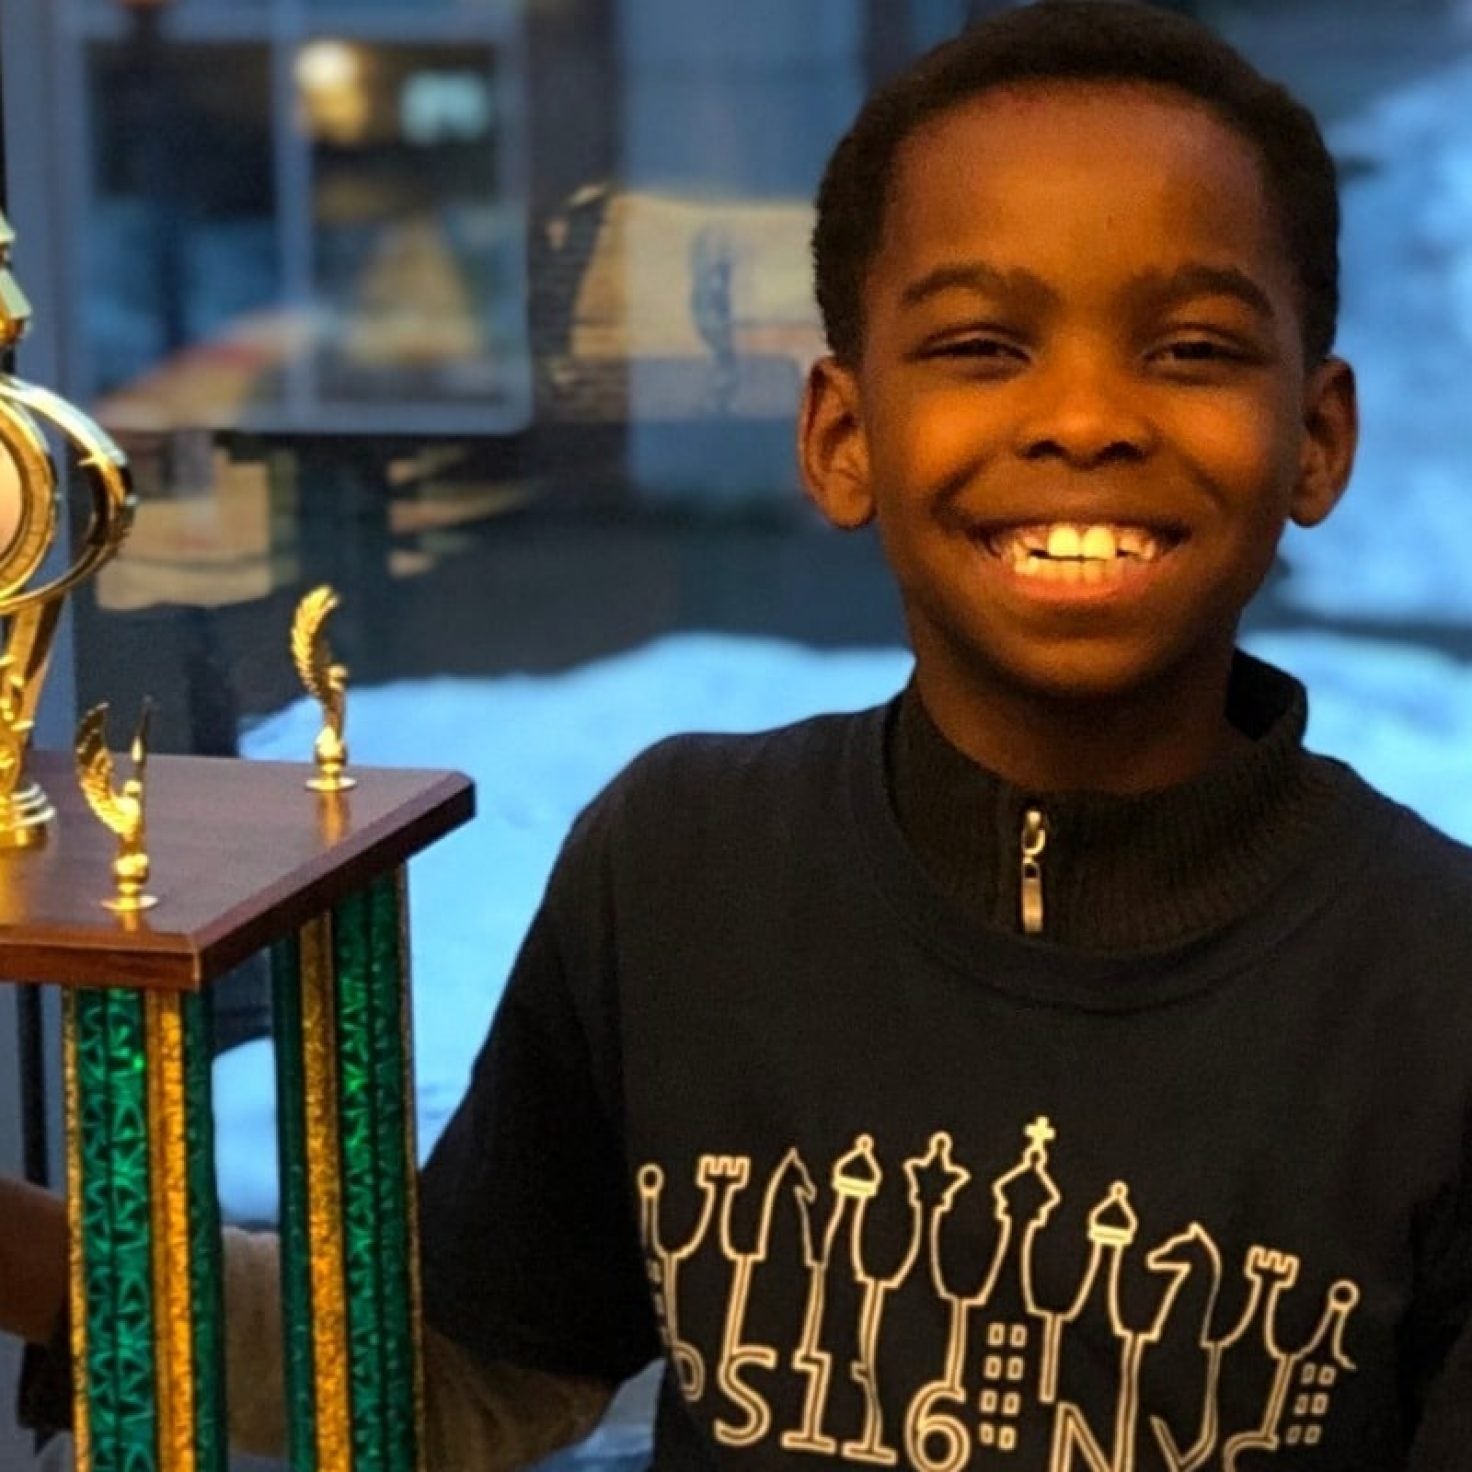 This 8-Year-Old Homeless New York State Chess Champion Has Moved Into A New Apartment